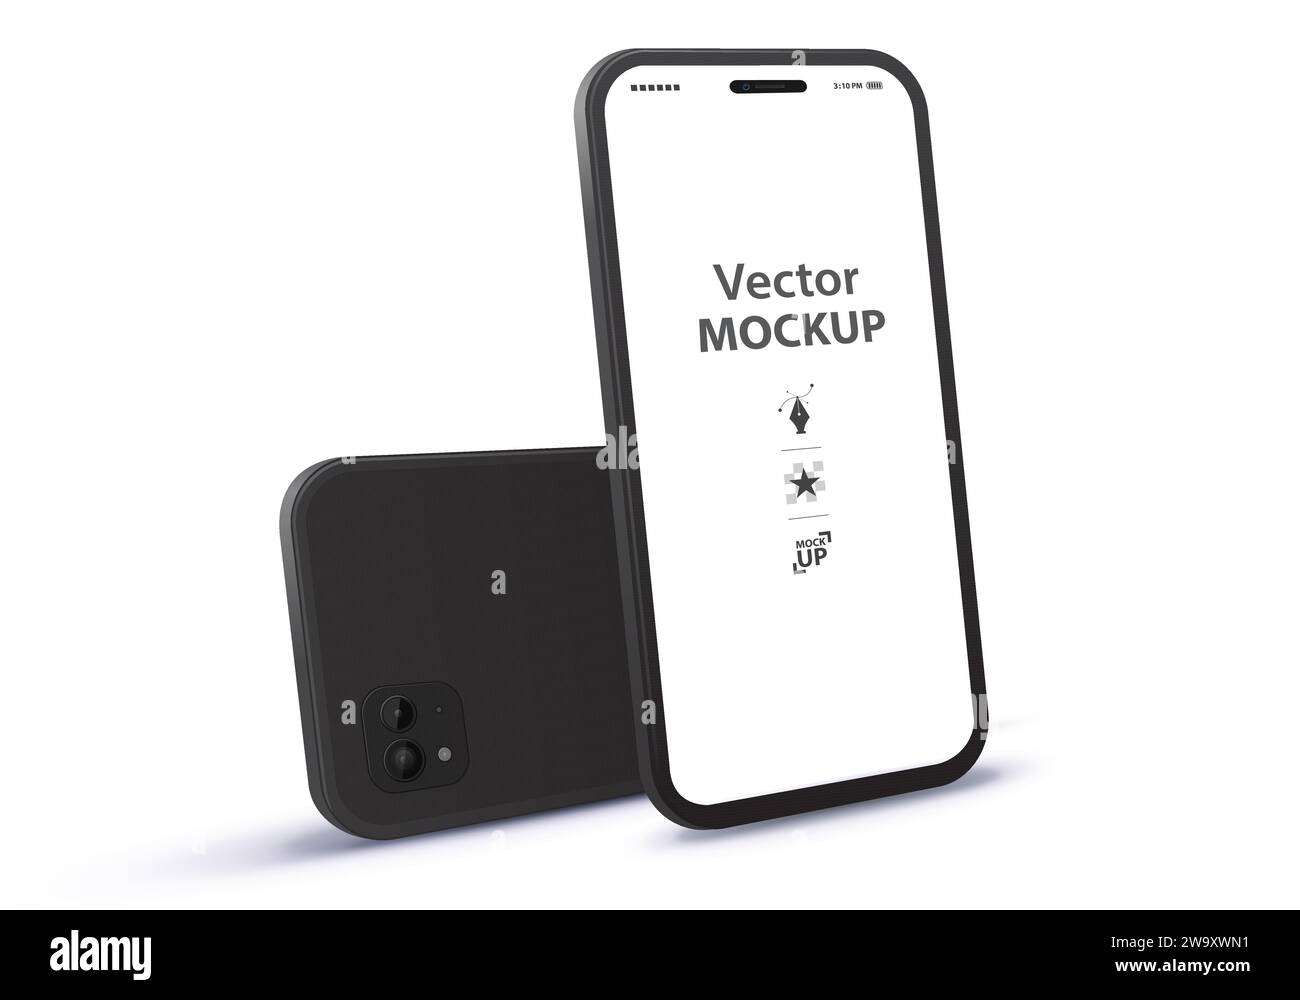 Black Mobile Phone Vector Mockup with Front and Back Perspective View. Blank screen smartphone illustration isolated on white background. Stock Vector